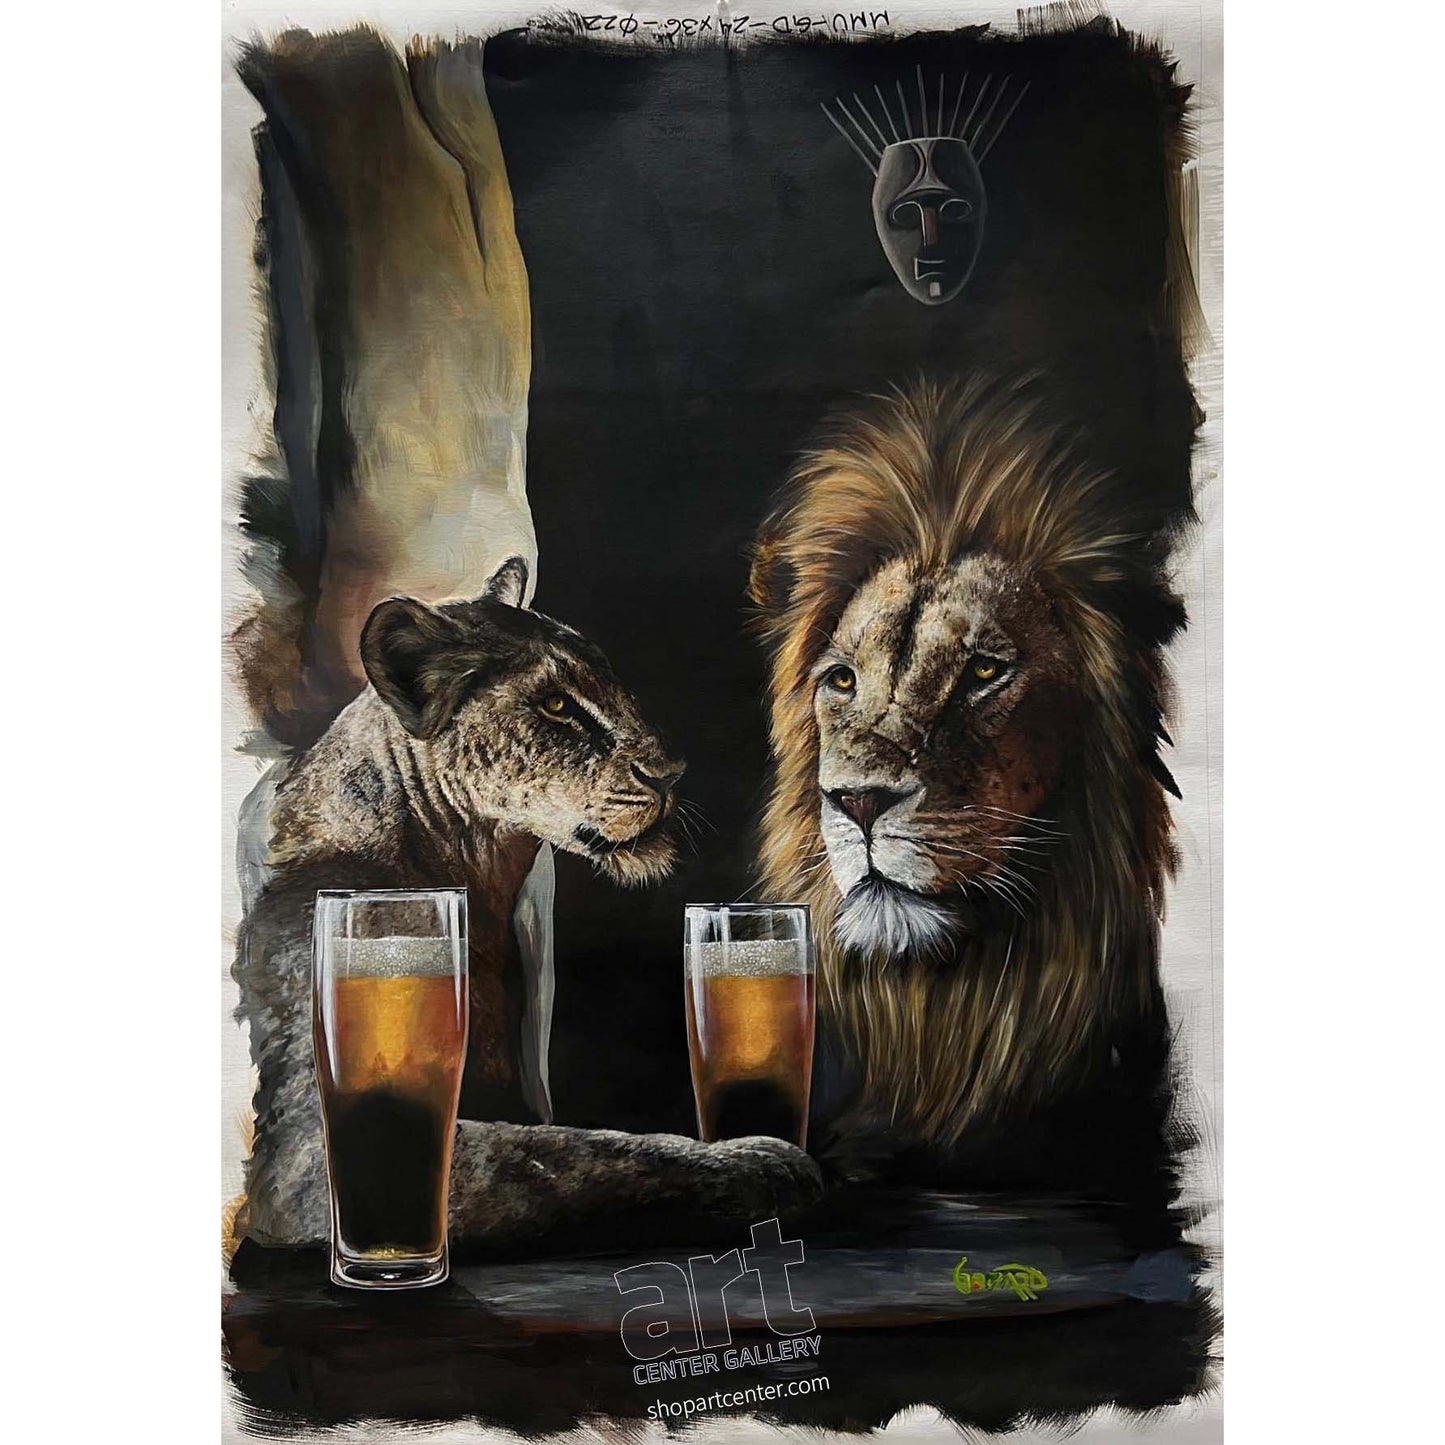 Michael Godard "King of Beers" Limited Edition Canvas Giclee